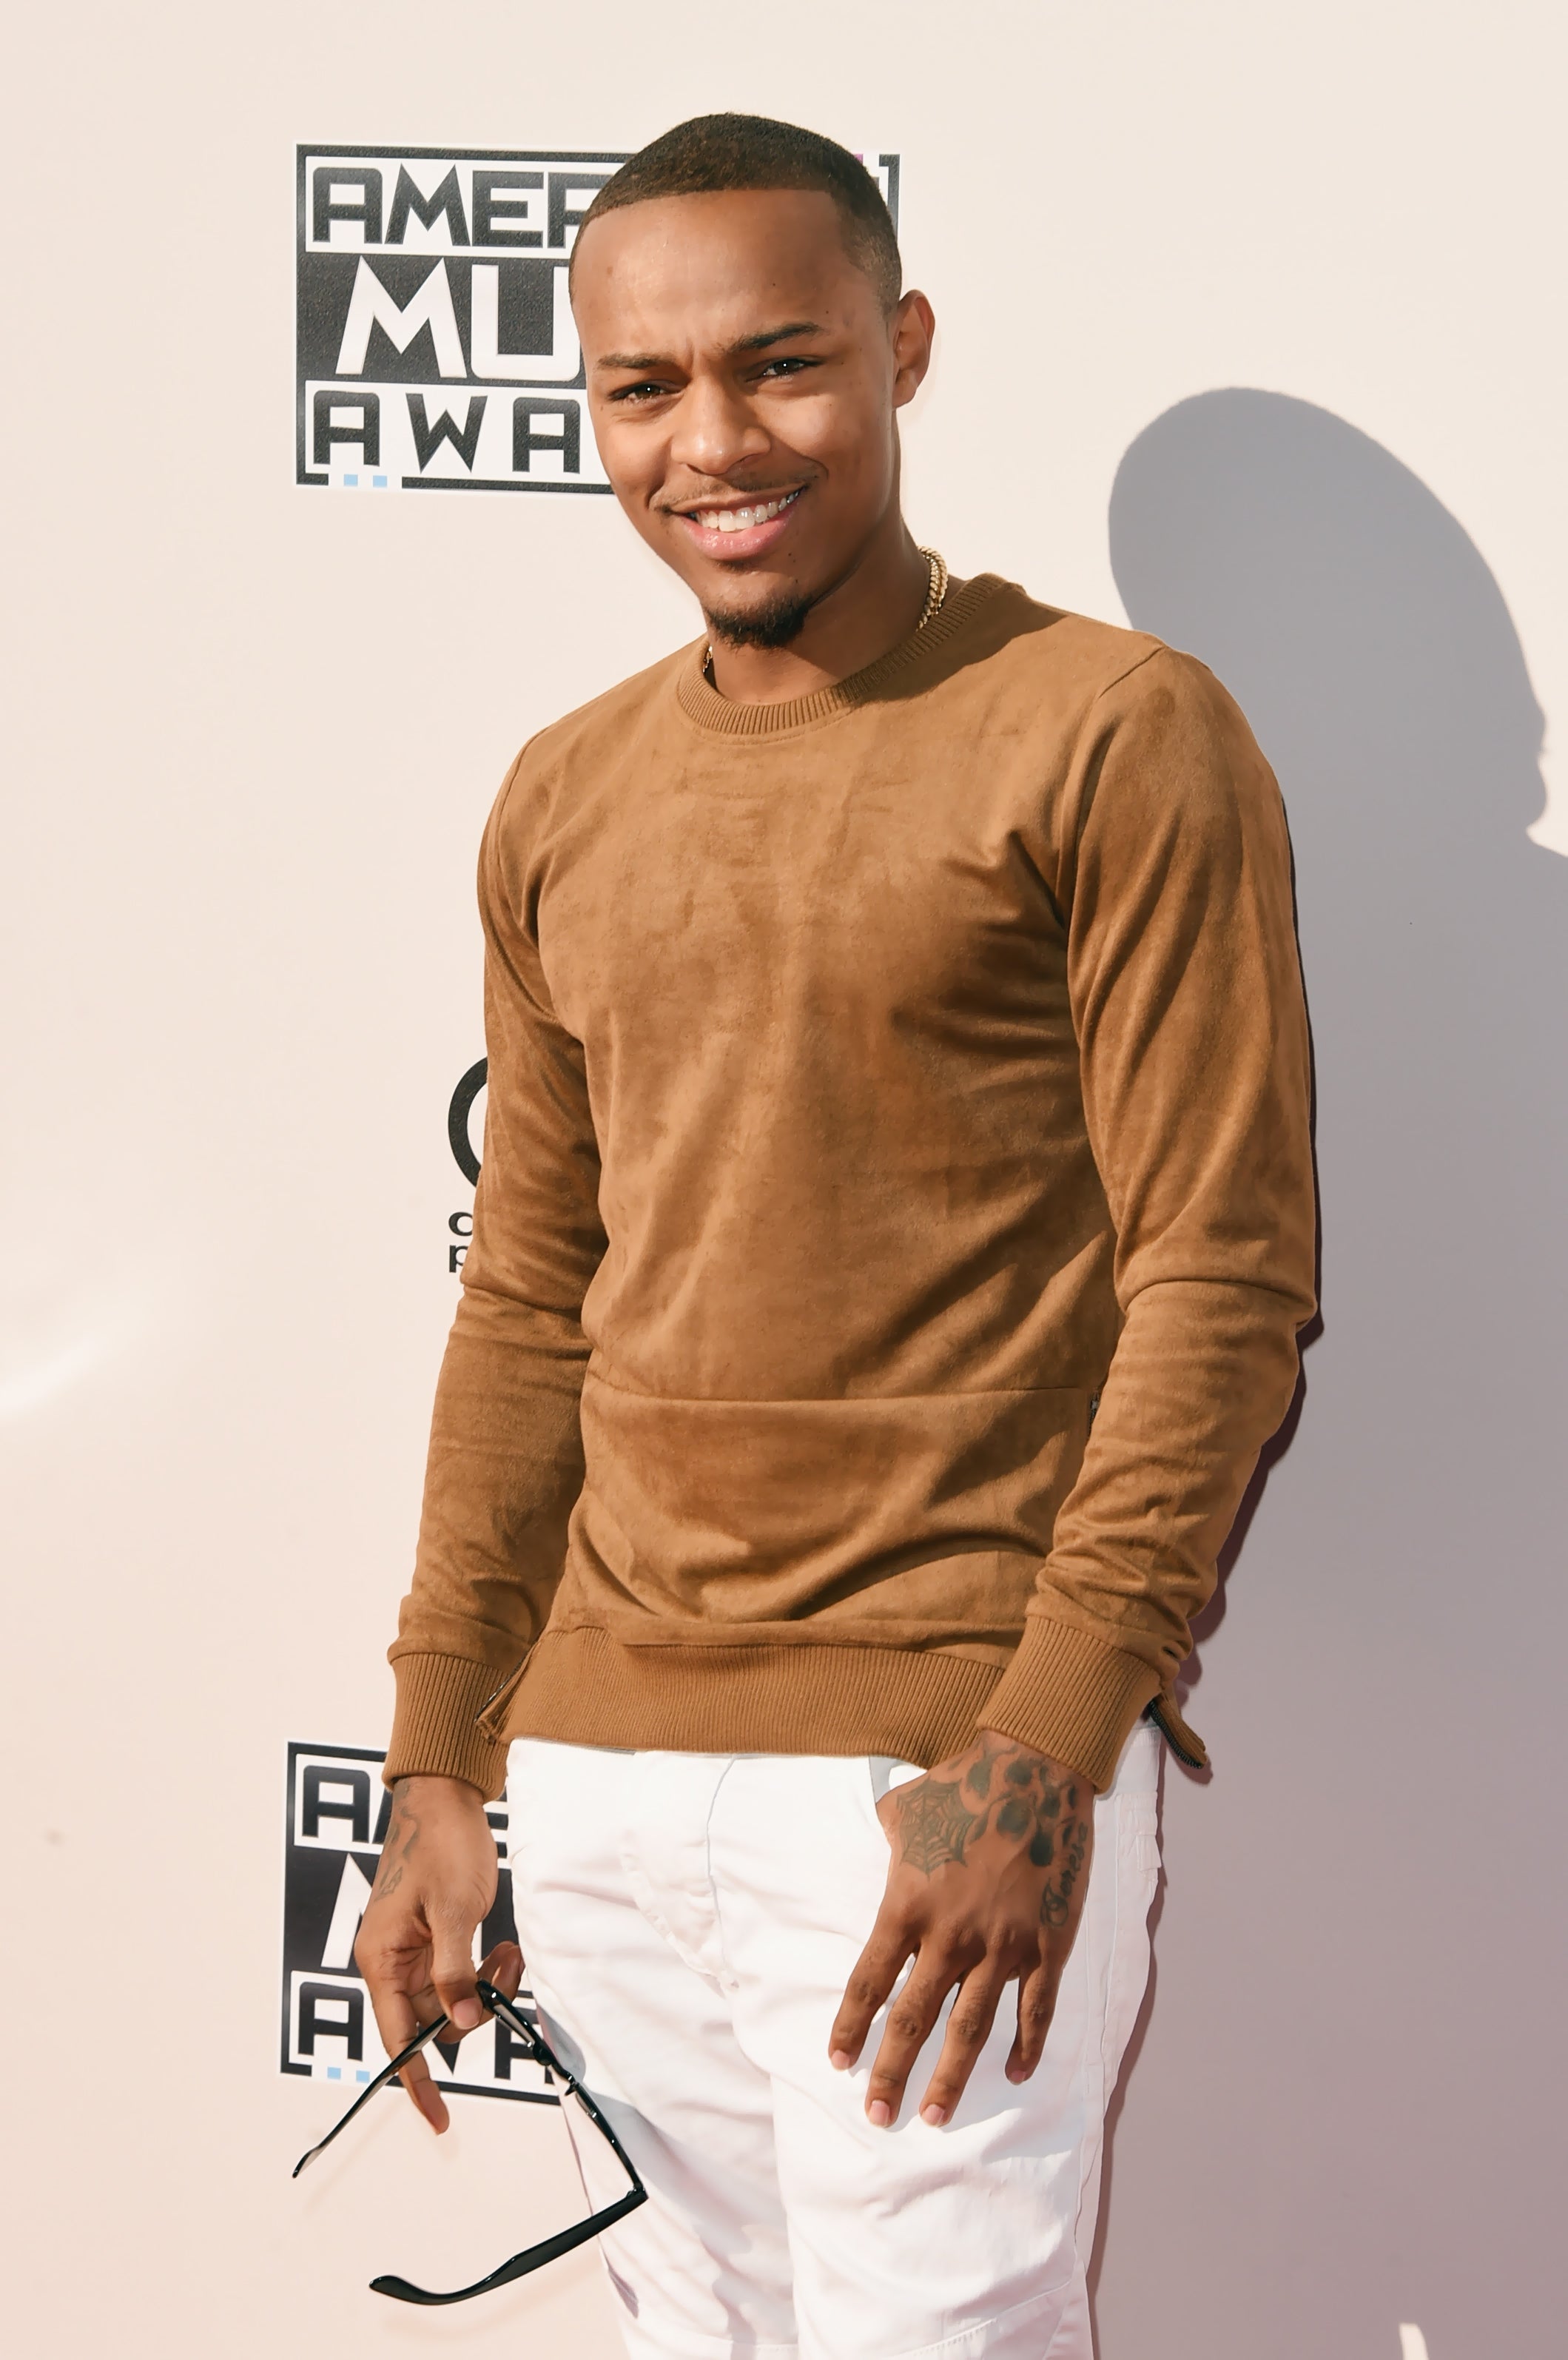 Bow Wow Lands His Own Late Night Talk Show